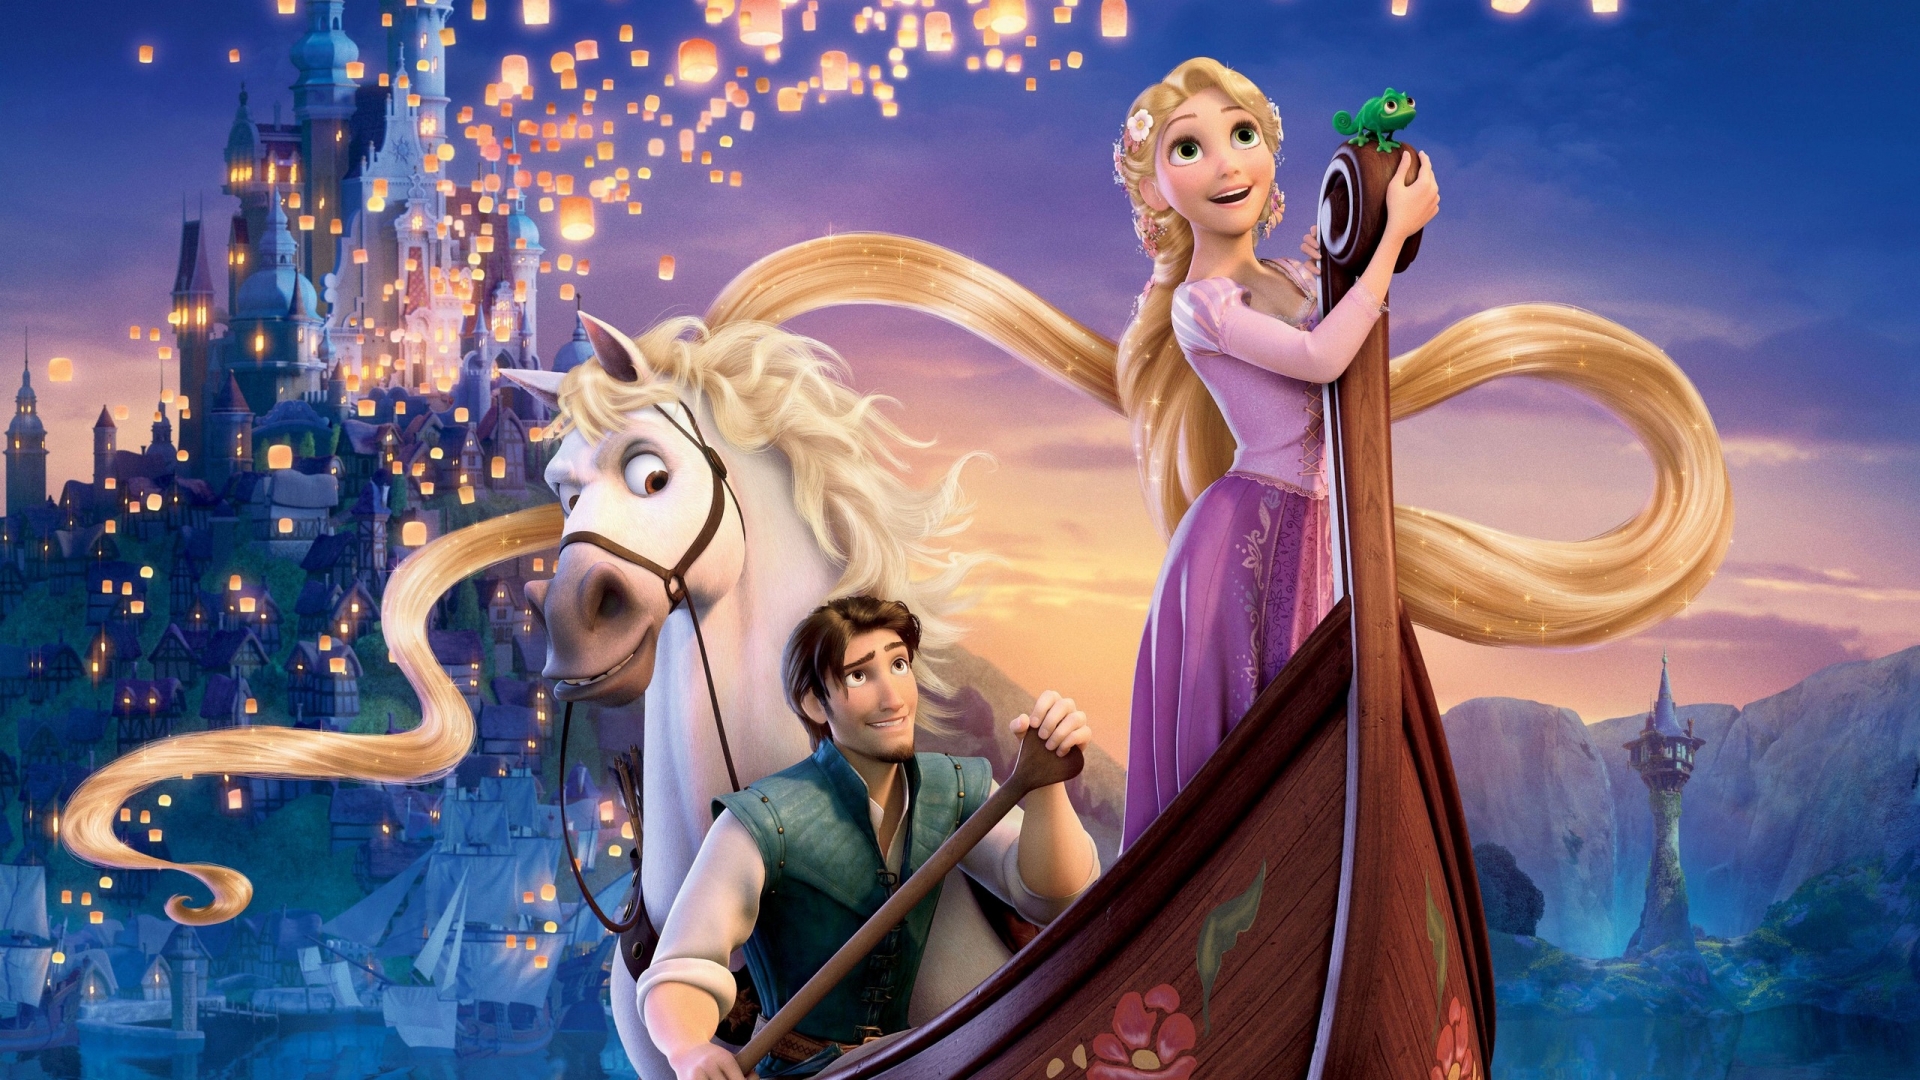 Tangled – Let’s Come Out To The True World And Live Forever